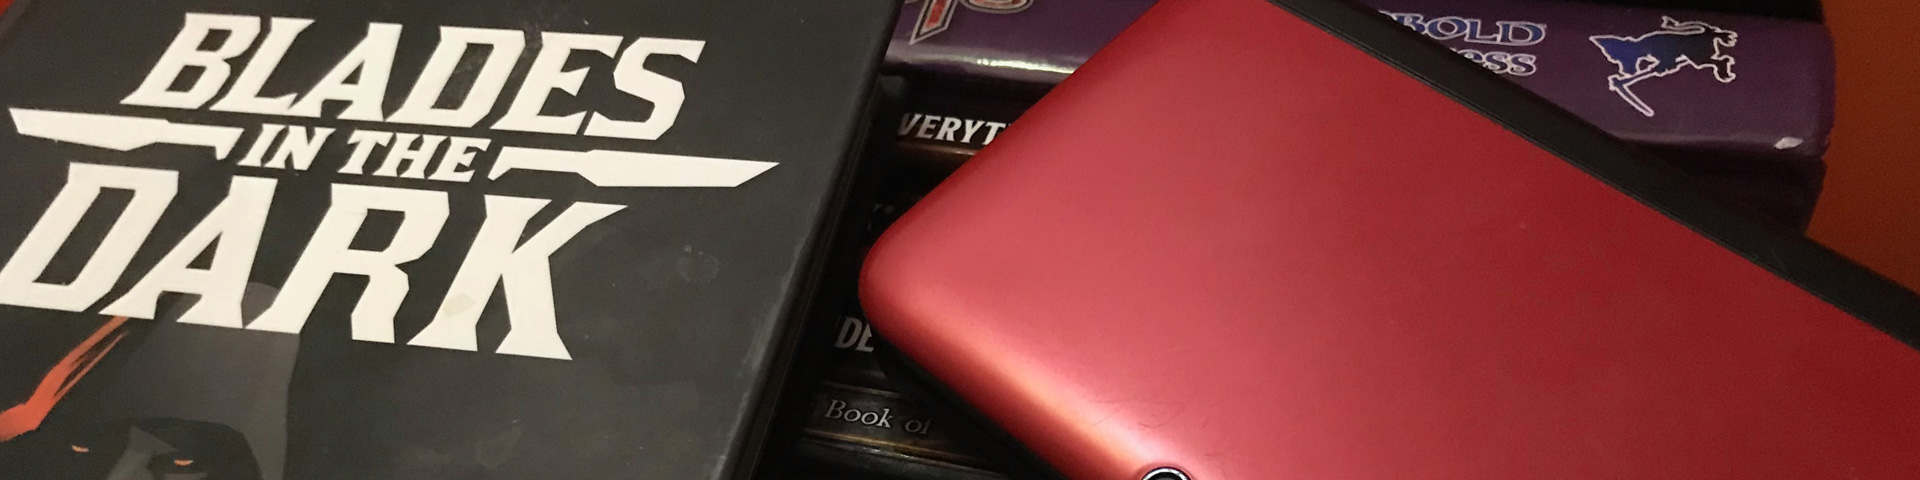 A role-playing game book lays next to a red Nintendo 3DS portable game console. Other RPG source books can be seen beneath the objects.